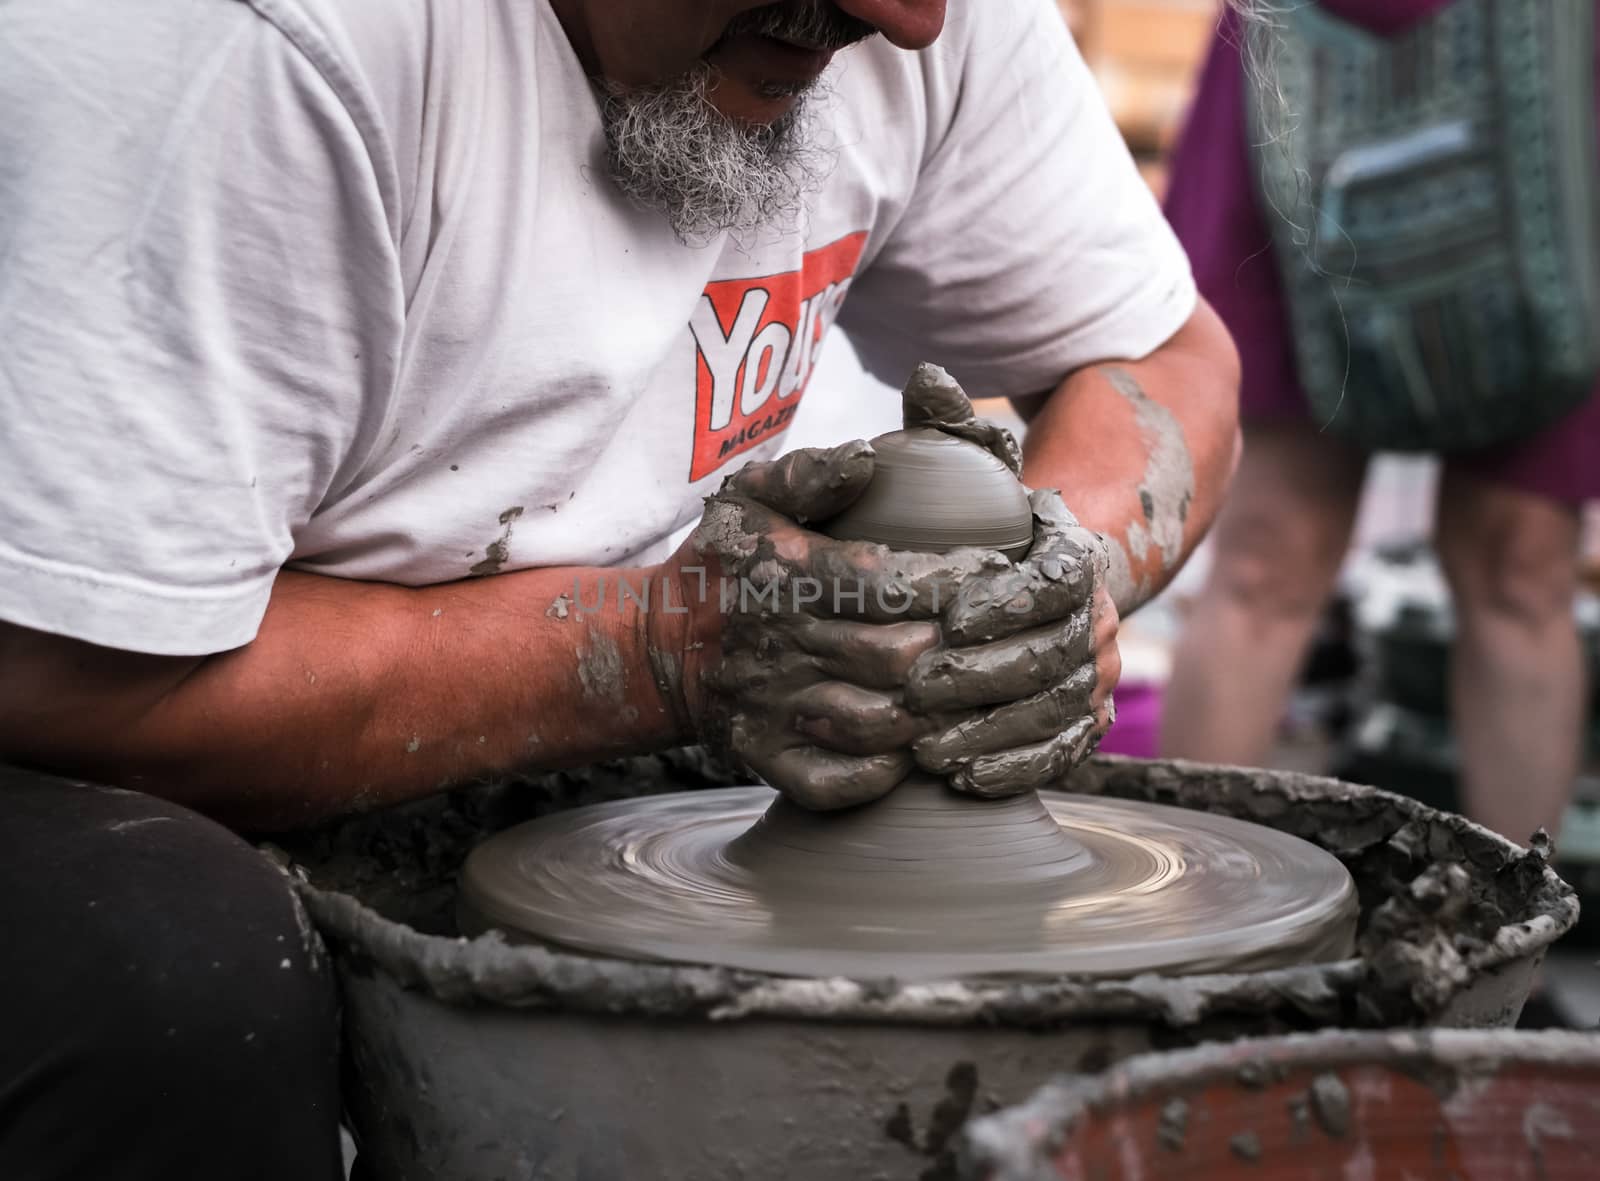 Sibiu City, Romania - 31 August 2019. Hands of a potter shaping a clay pot on a potter's wheel at the potters fair from Sibiu, Romania